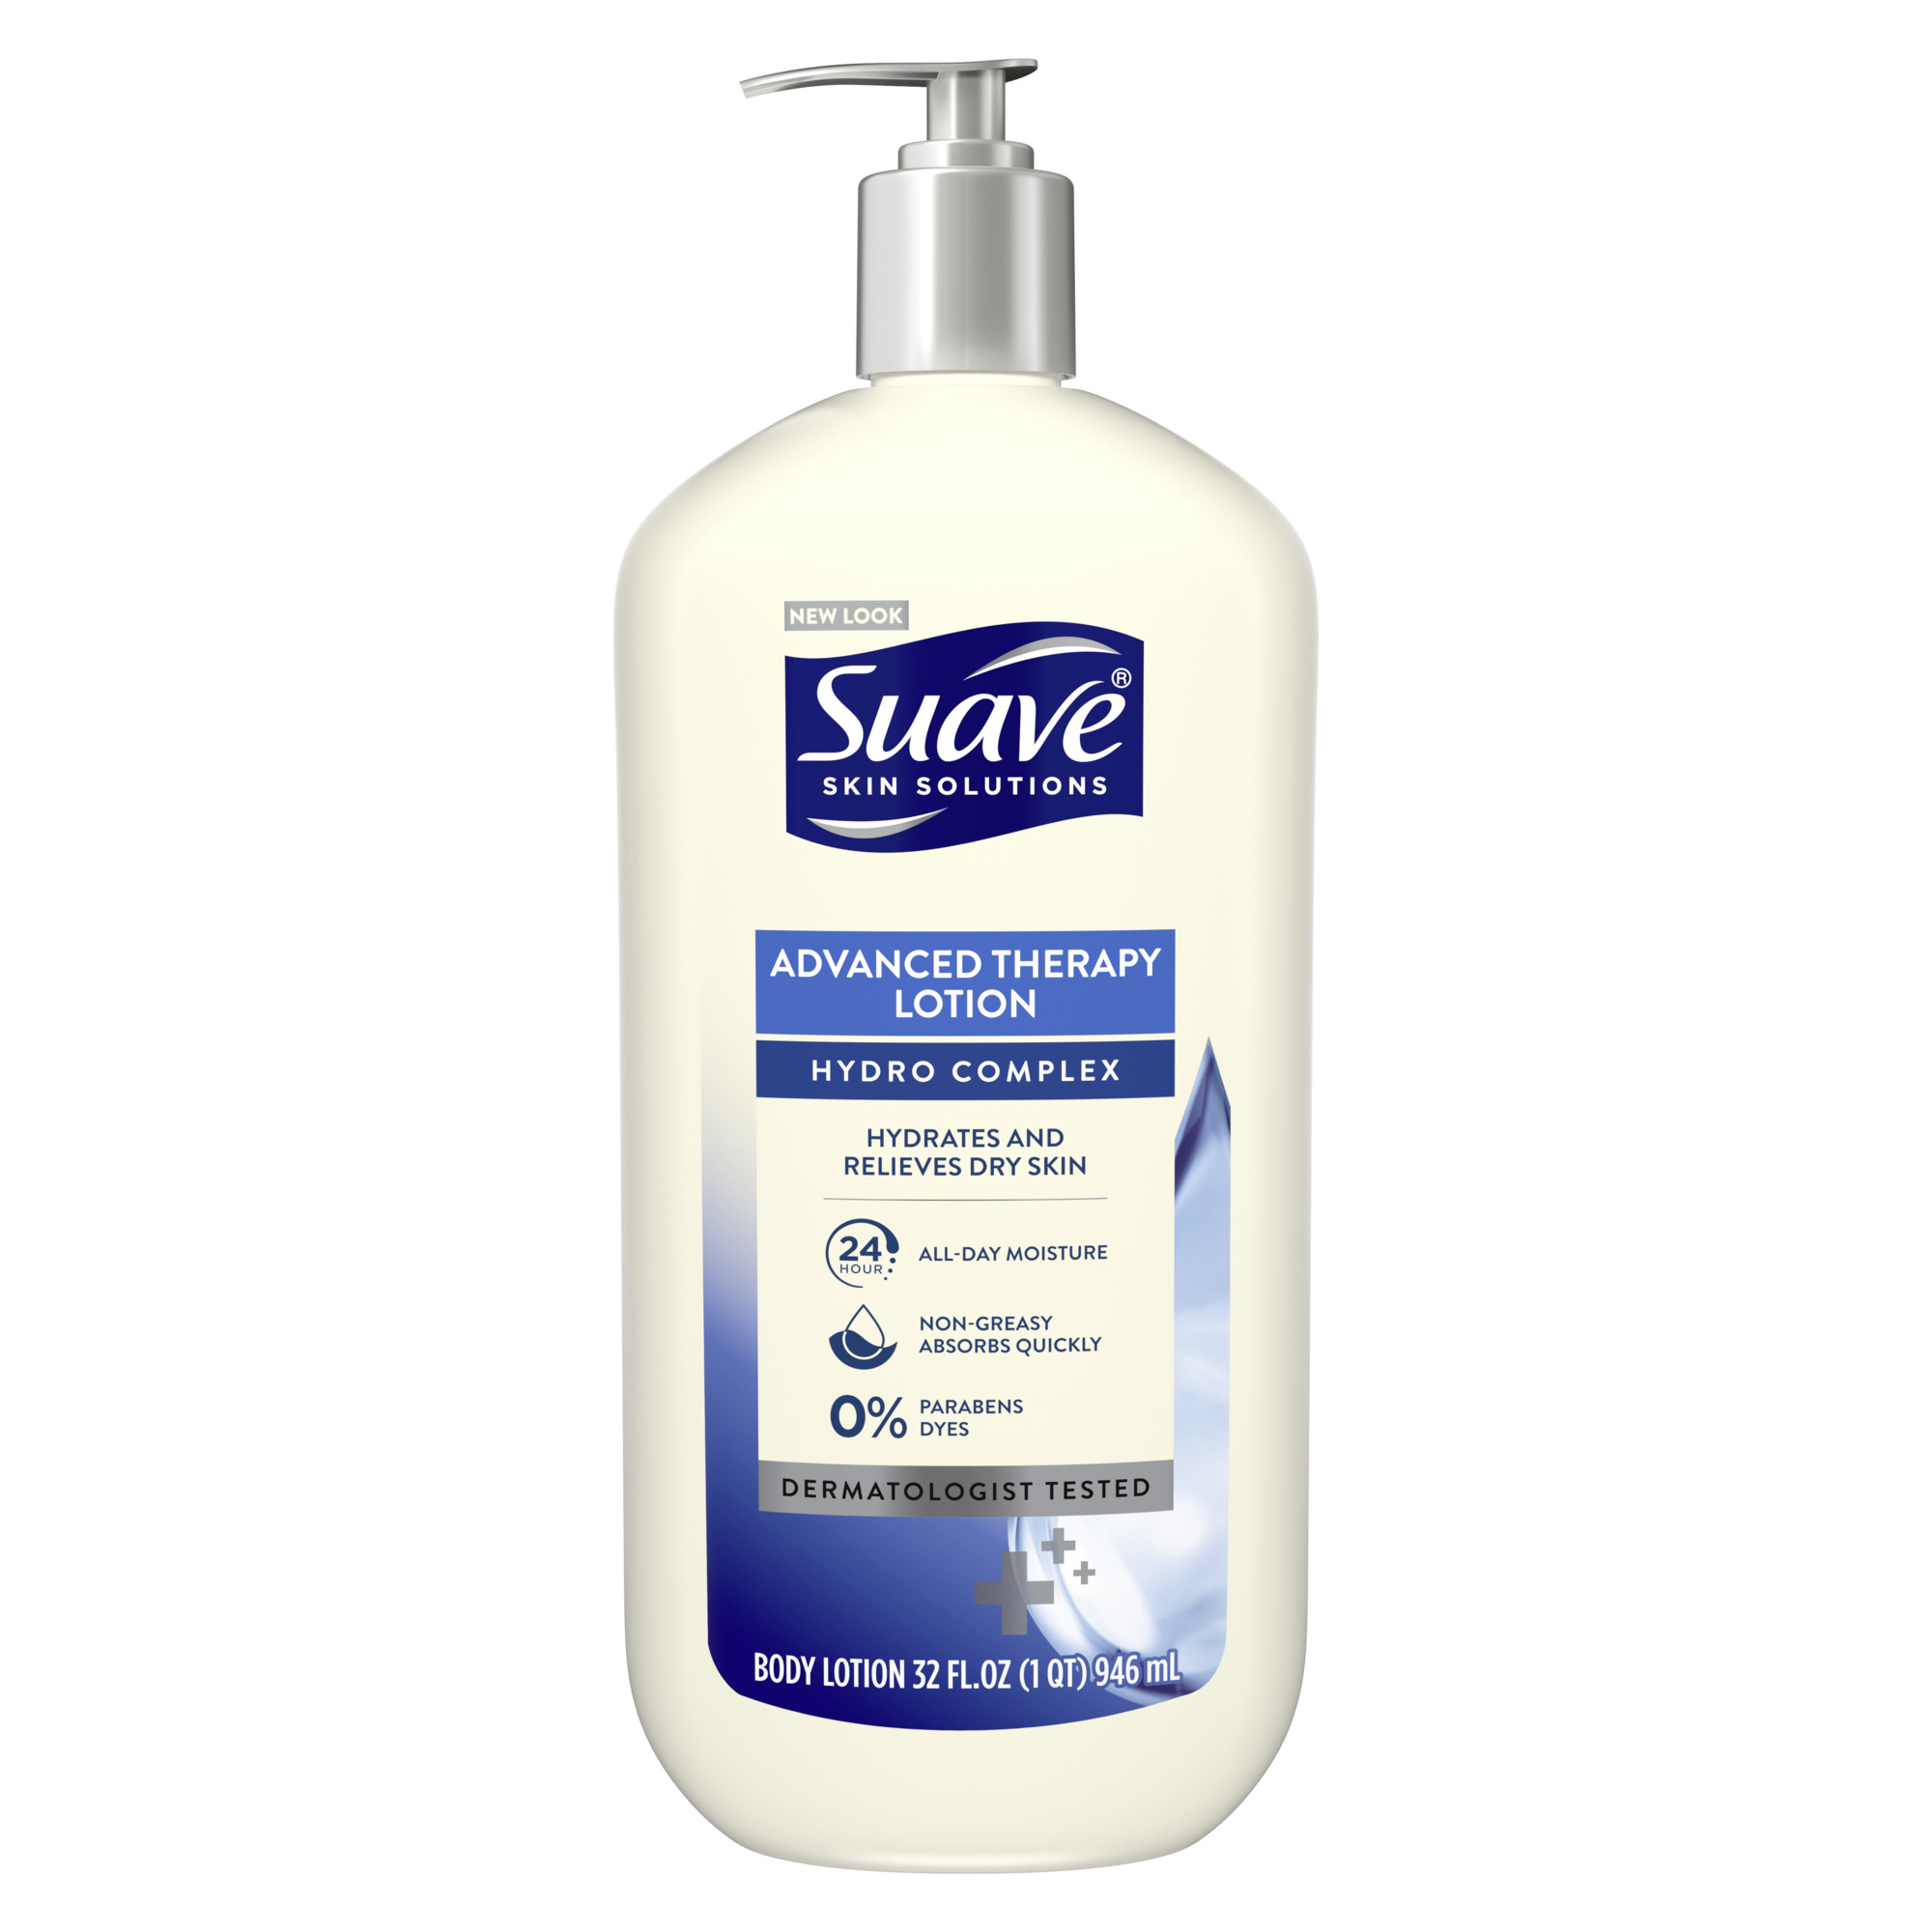 Suave Skin Solutions Moisturizing Body Lotion, Advanced Therapy, Dermatologist Tested for All Skin Types, 32 oz - image 1 of 11